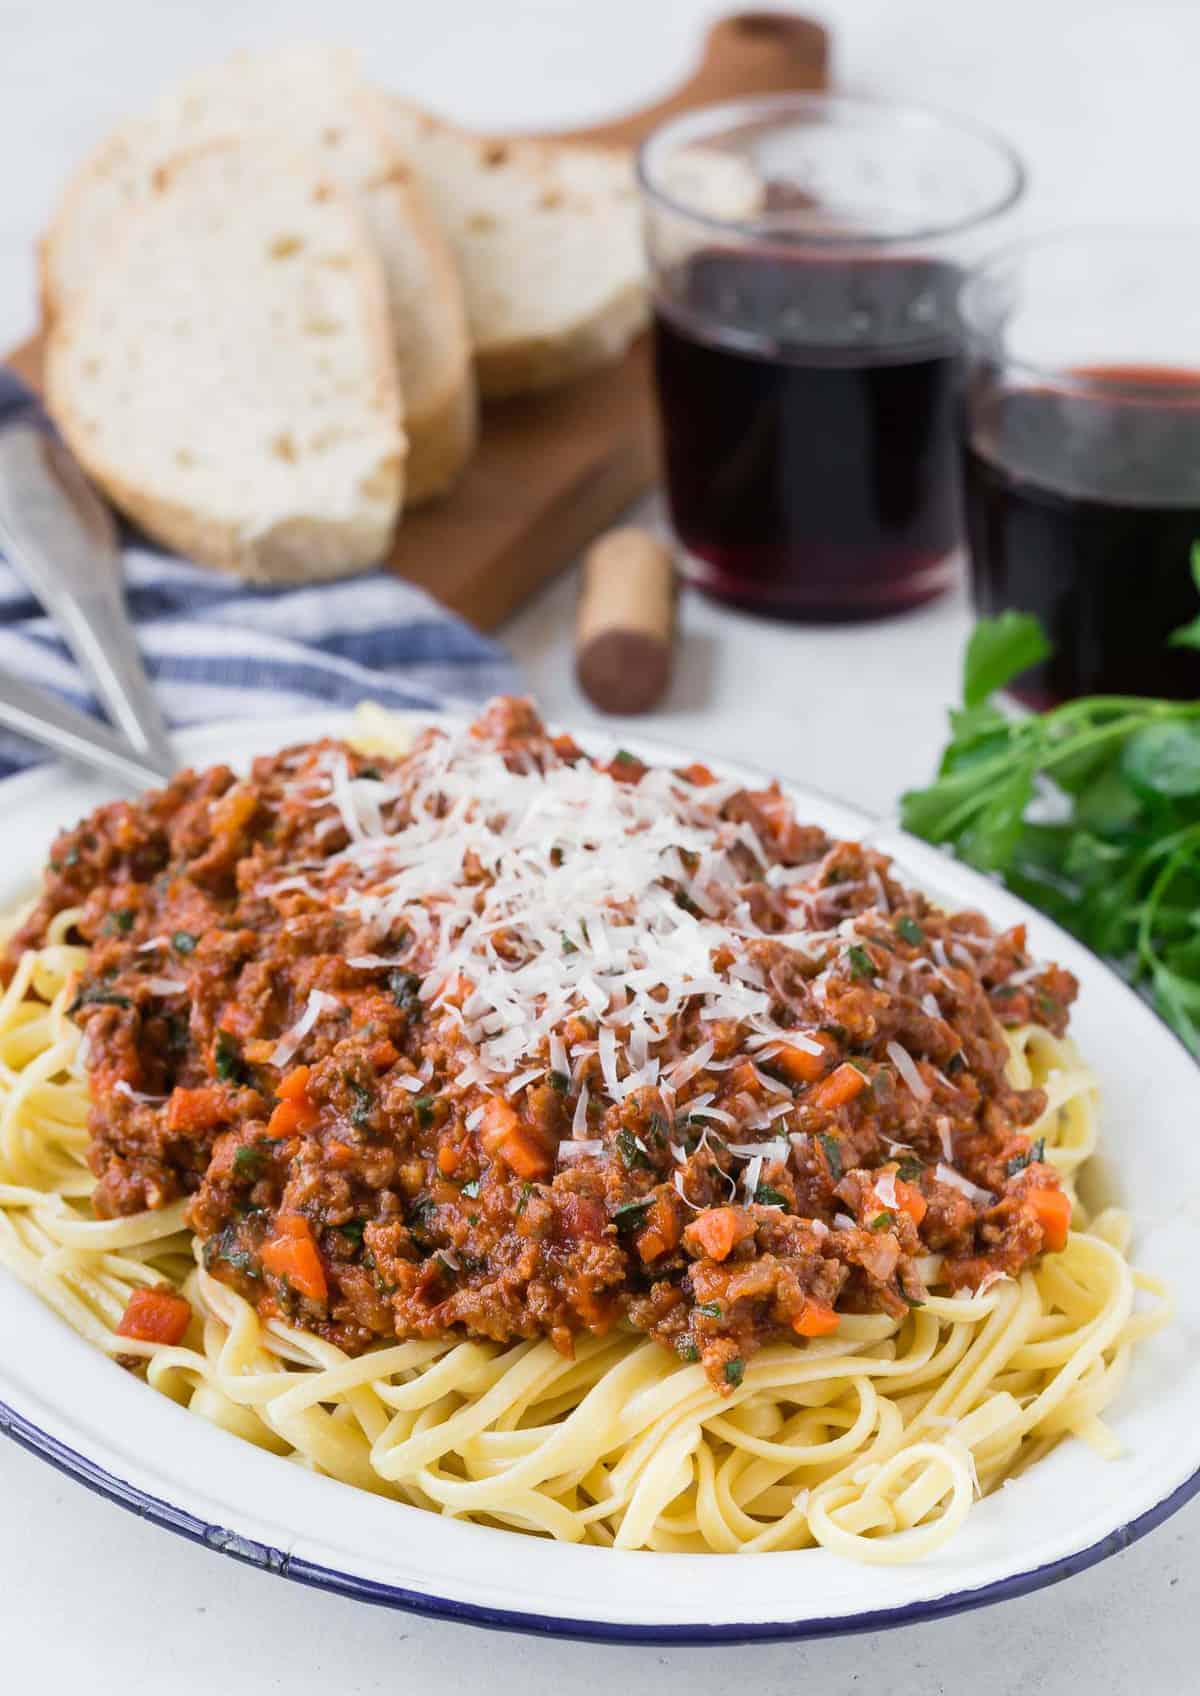 Large platter of pasta with tomato sauce, in front of wine, bread, and fresh herbs.